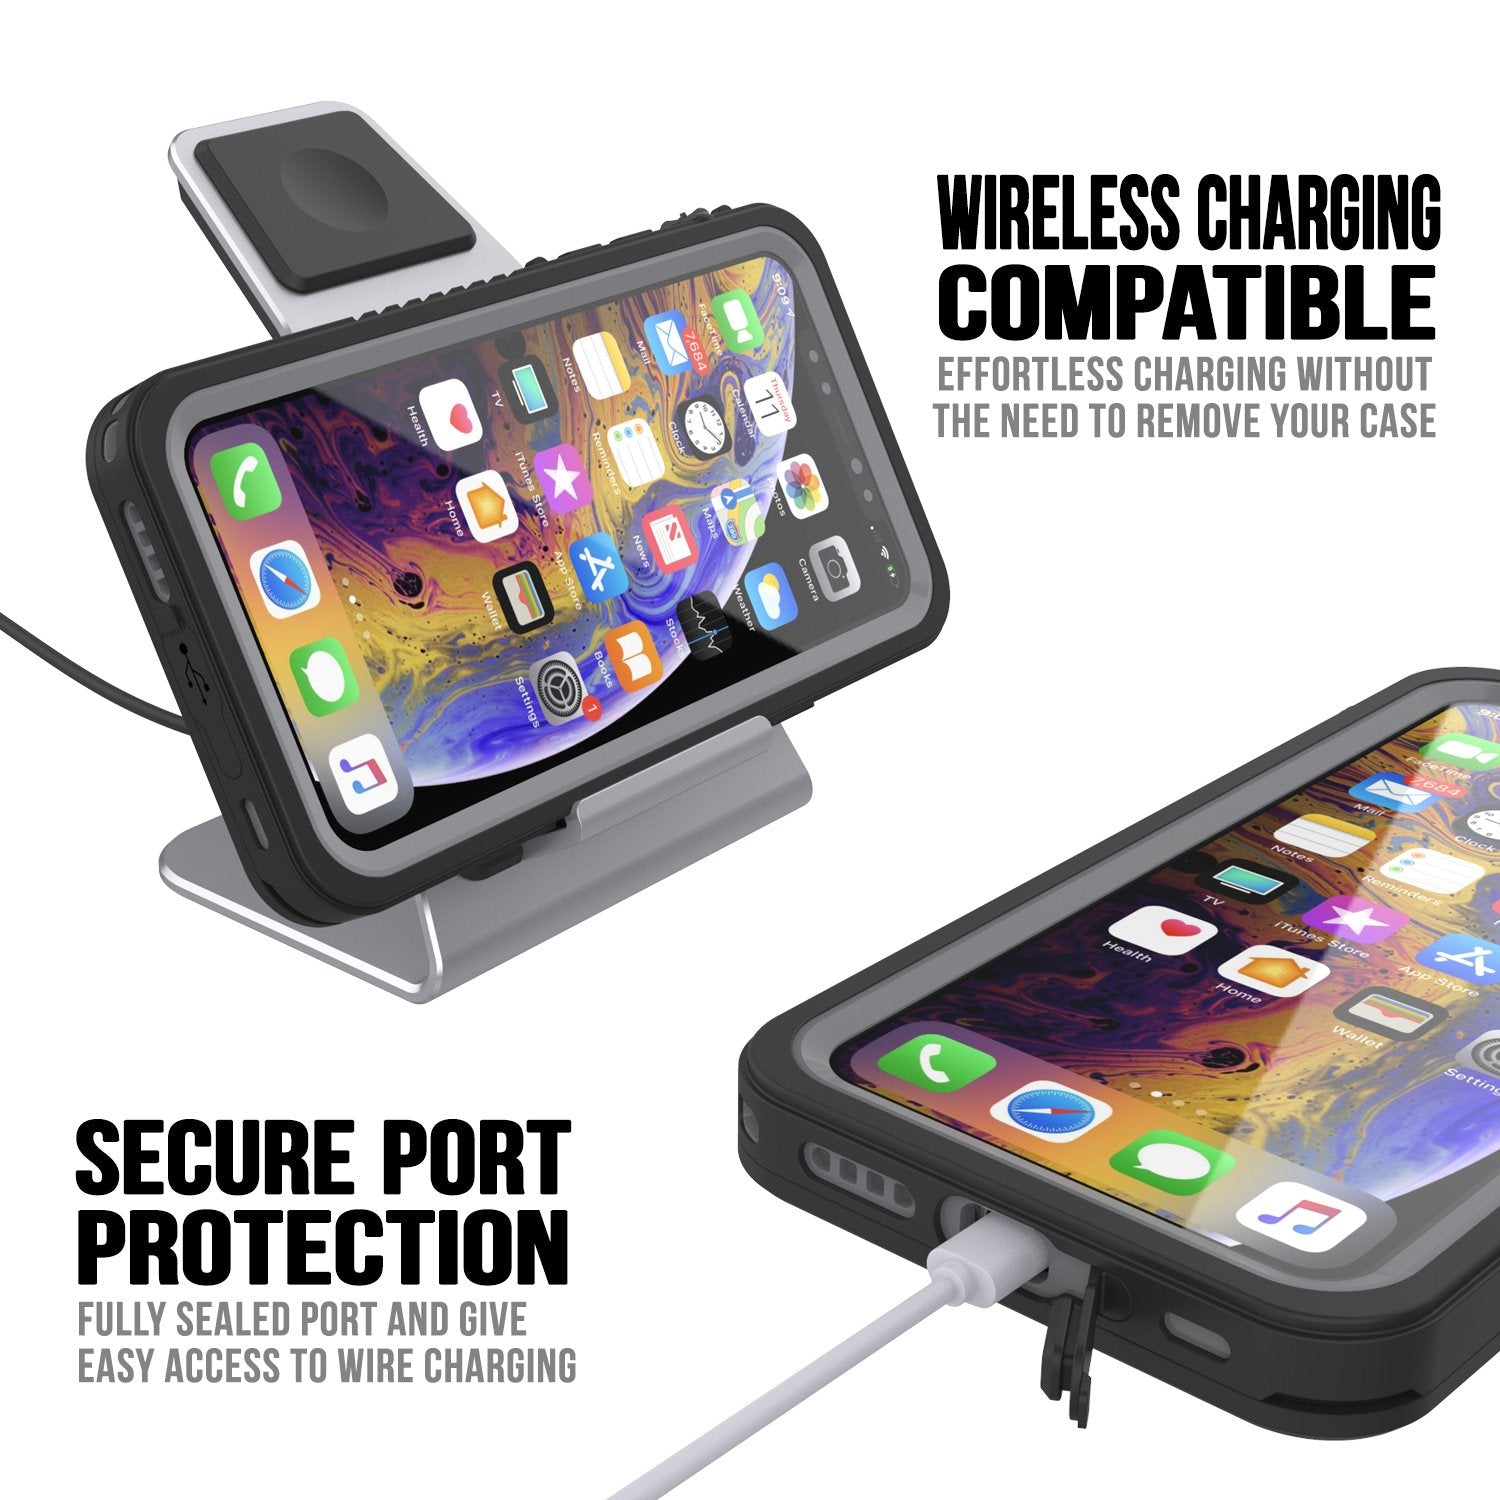 iPhone 11 Waterproof Case, Punkcase [Extreme Series] Armor Cover W/ Built In Screen Protector [Clear]